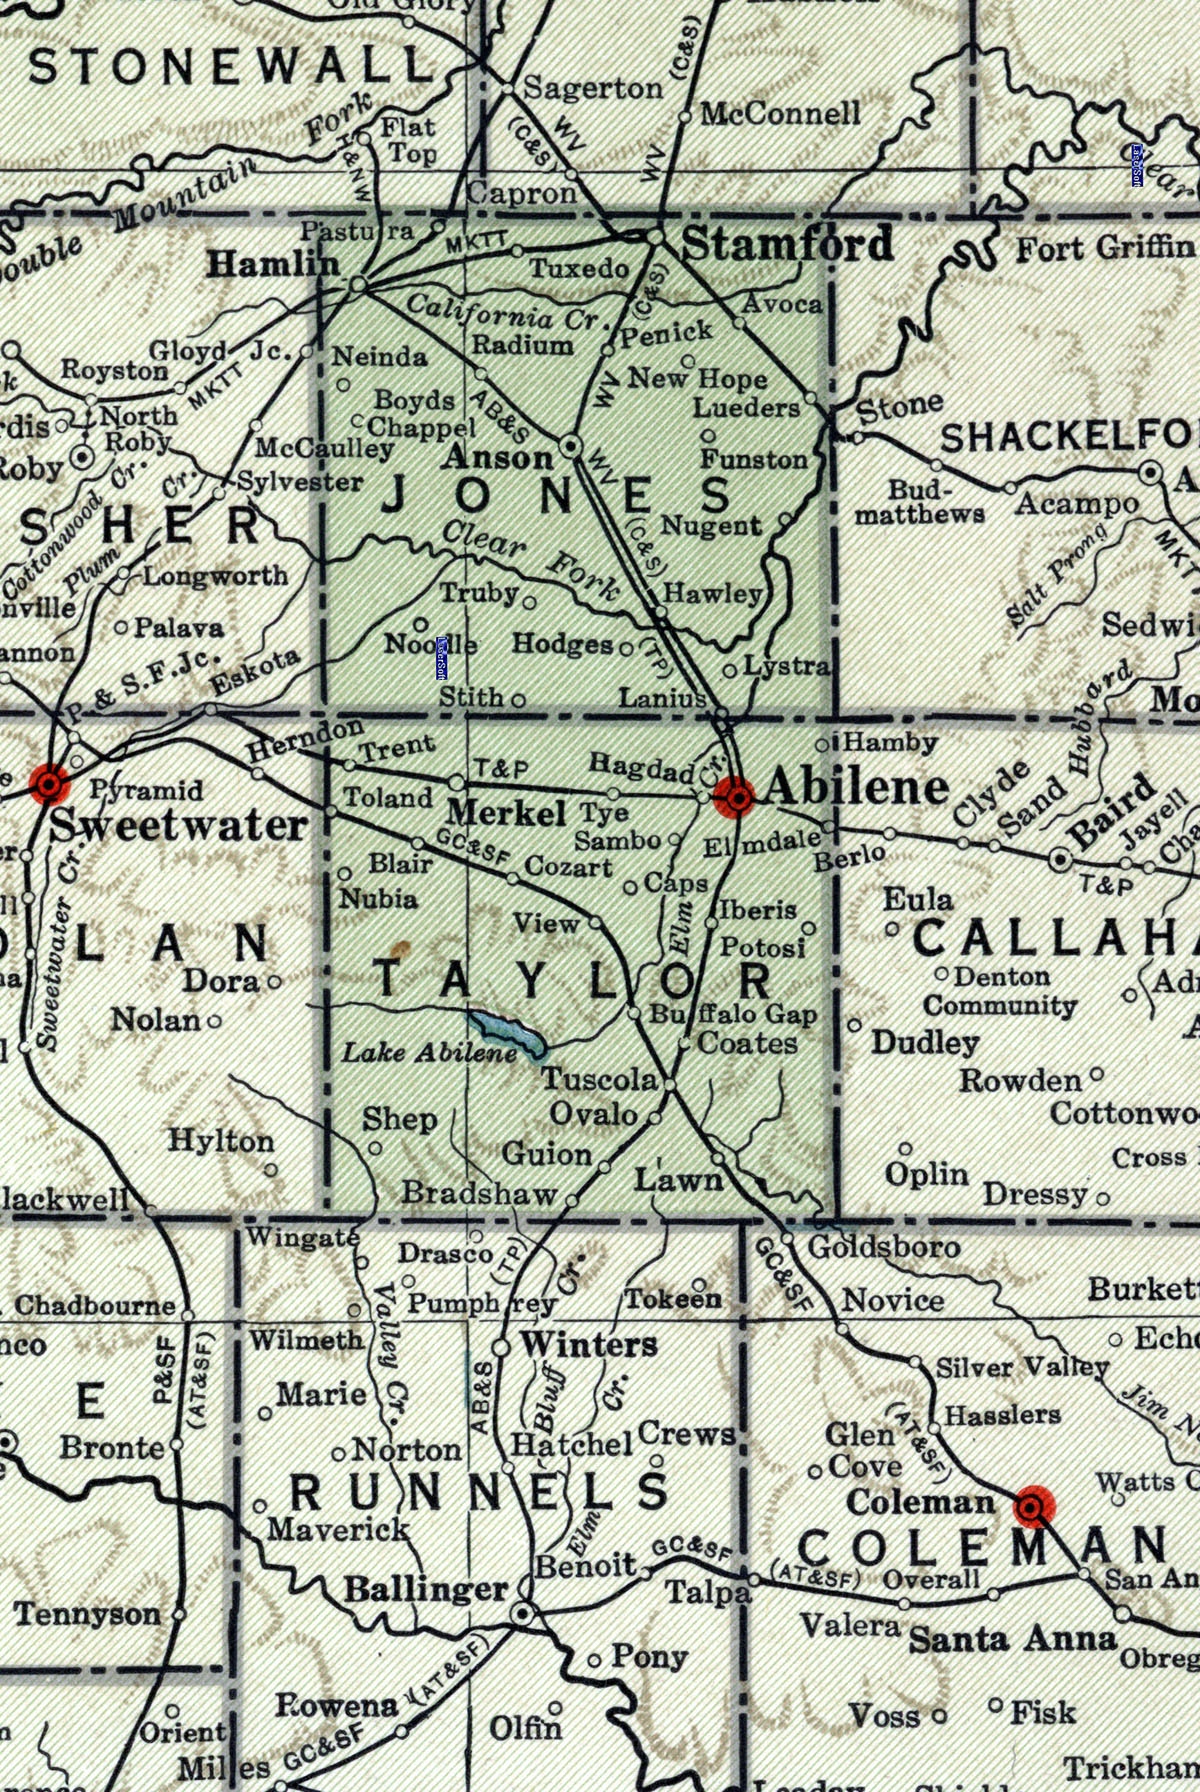 Abilene & Southern Railway Company (Tex.), map showing route in 1937.